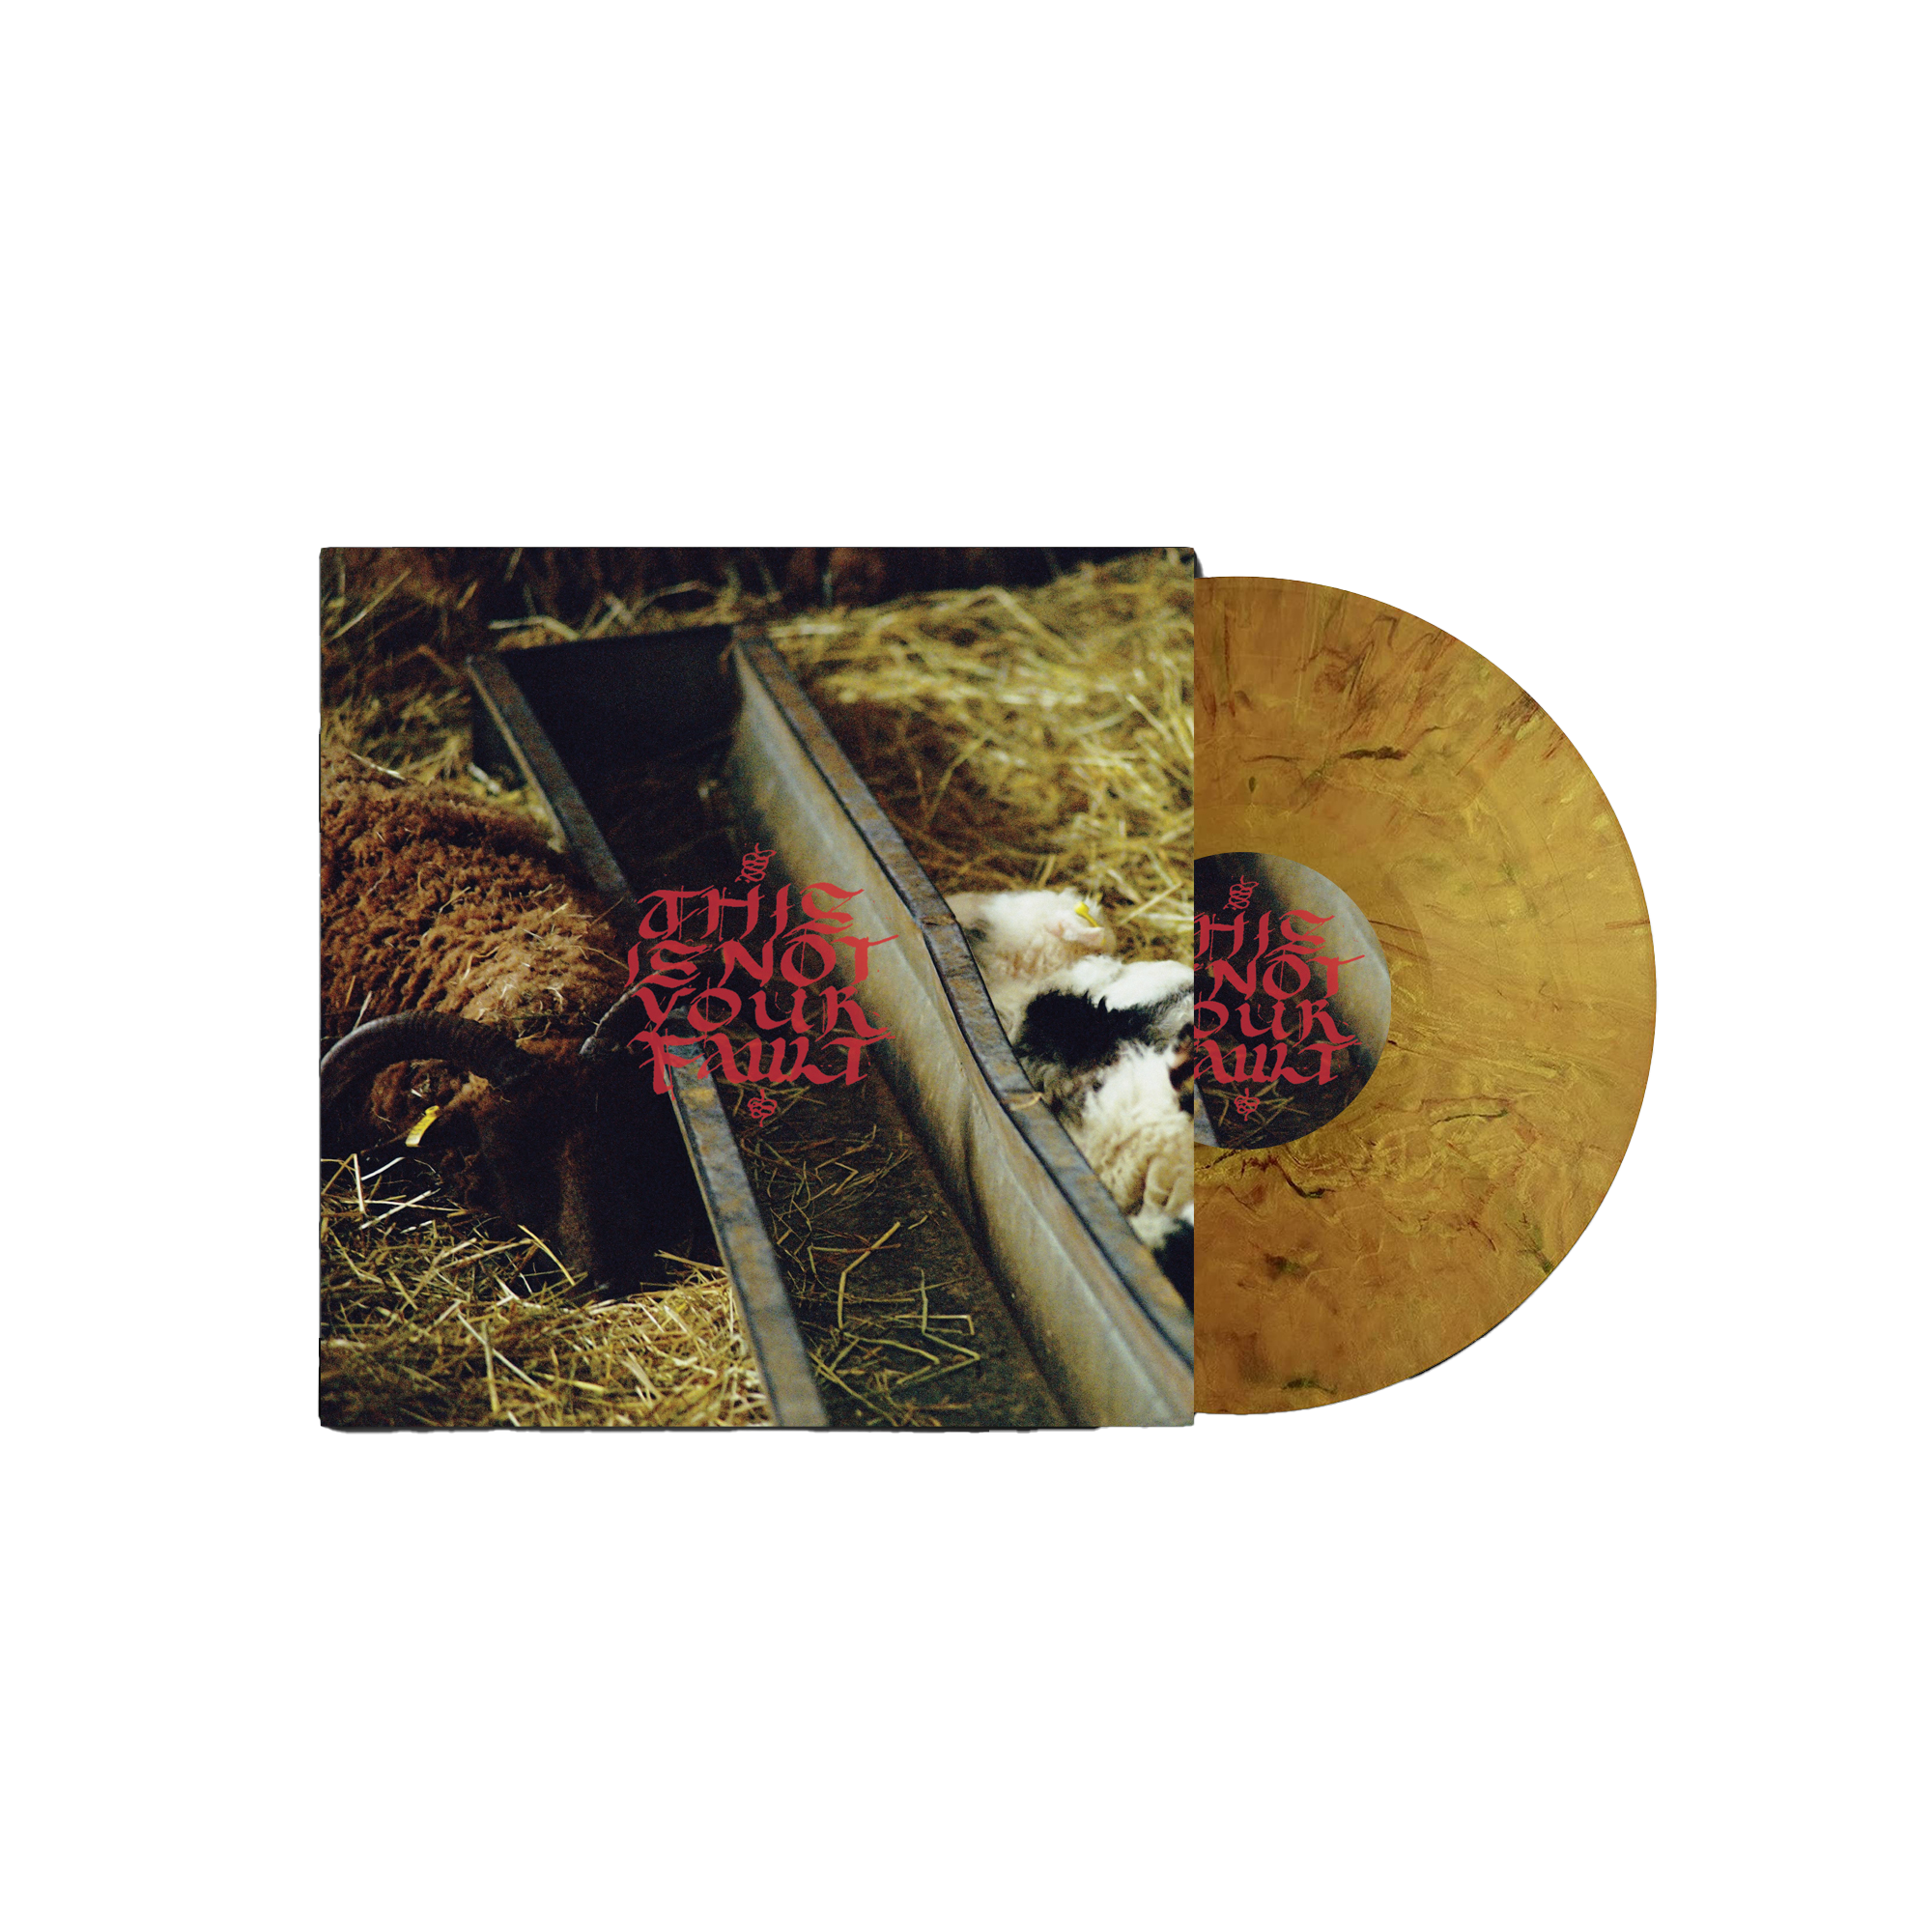 Green Gardens - This Is Not Your Fault: Limited Marbled Gold Vinyl LP